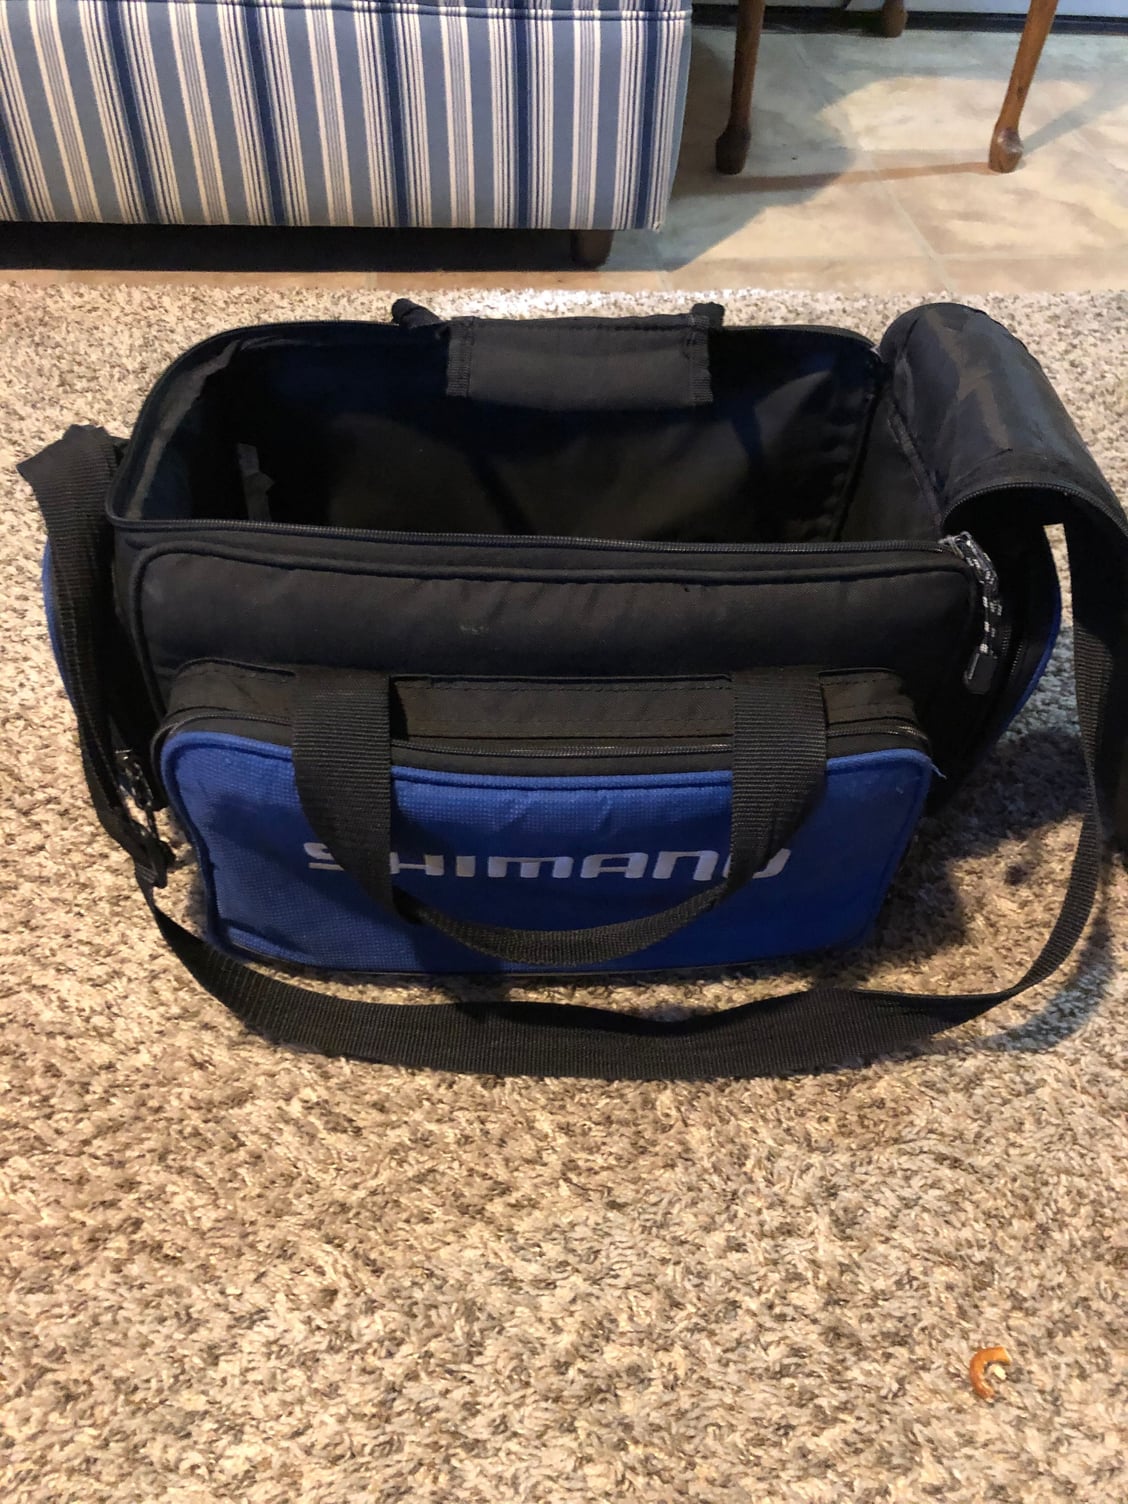 Shimano Tackle Bag - holds 4 - 3700 size boxes - SOLD - The Hull